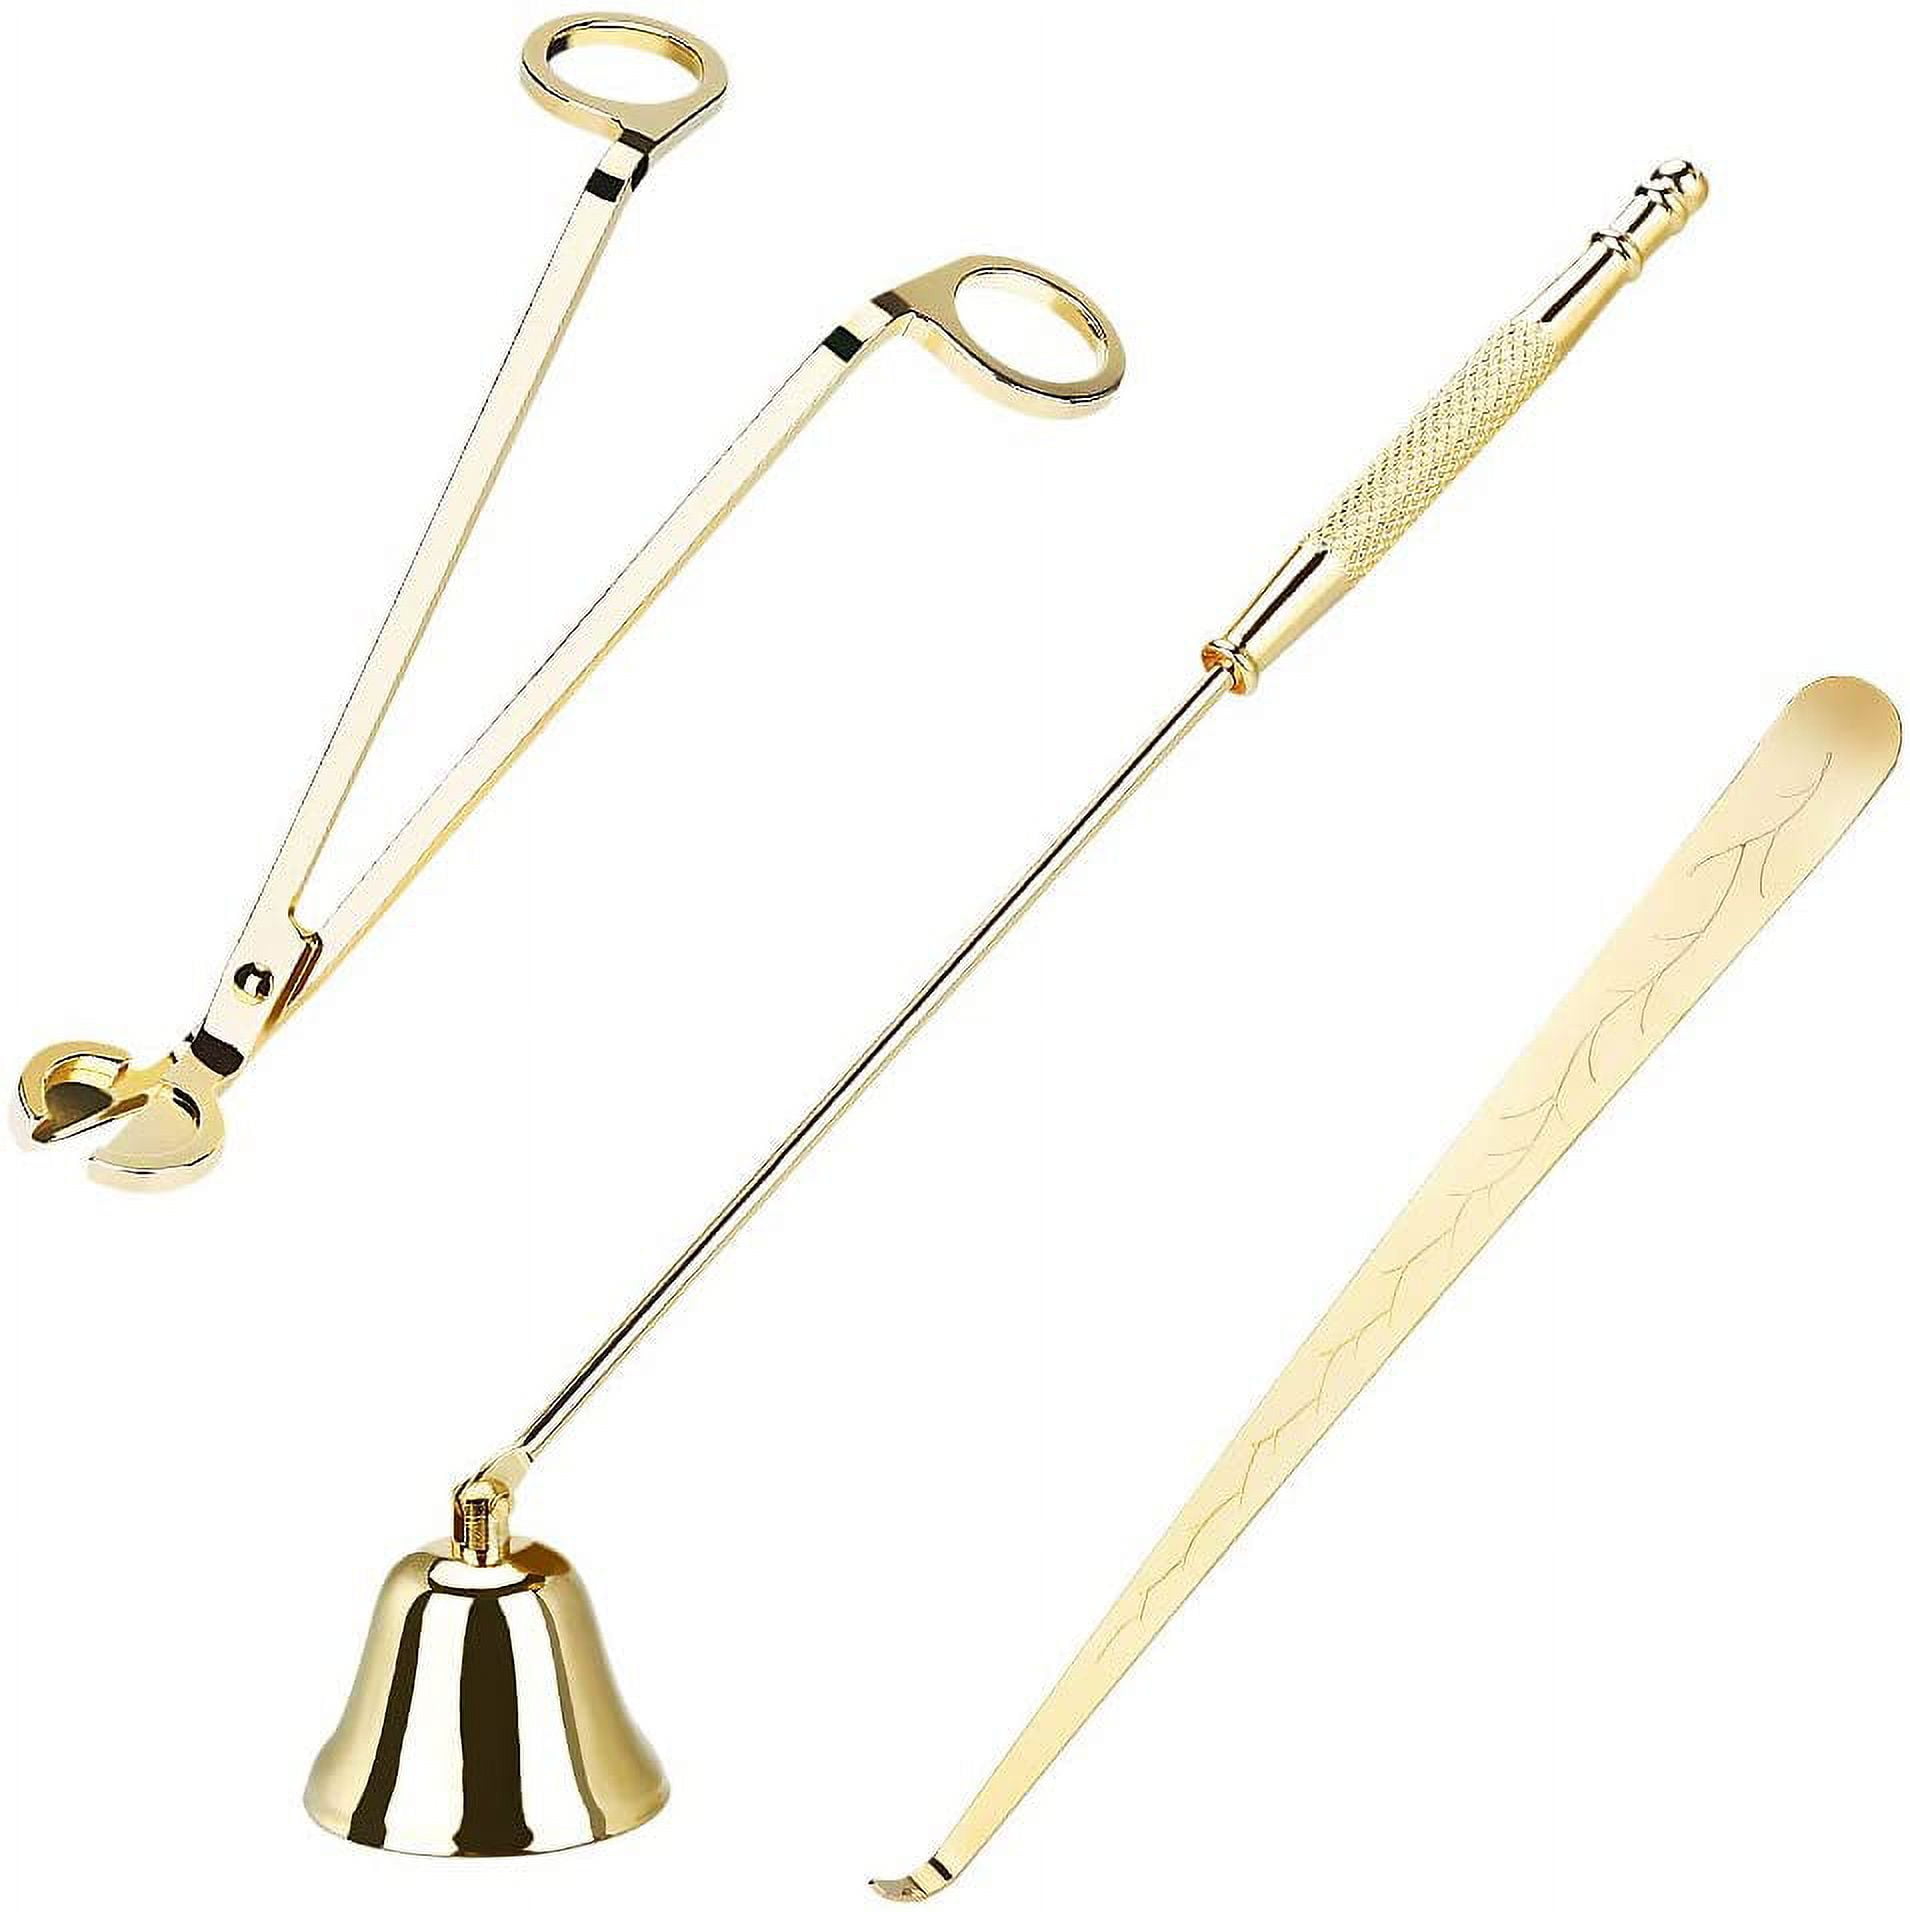 Candle Snuffer,3 in 1 Candle Accessory Set, Candle Wick Trimmer,Candle Wick  Dipper,Stainless Steel Candle Tools Set and for Candle Lover